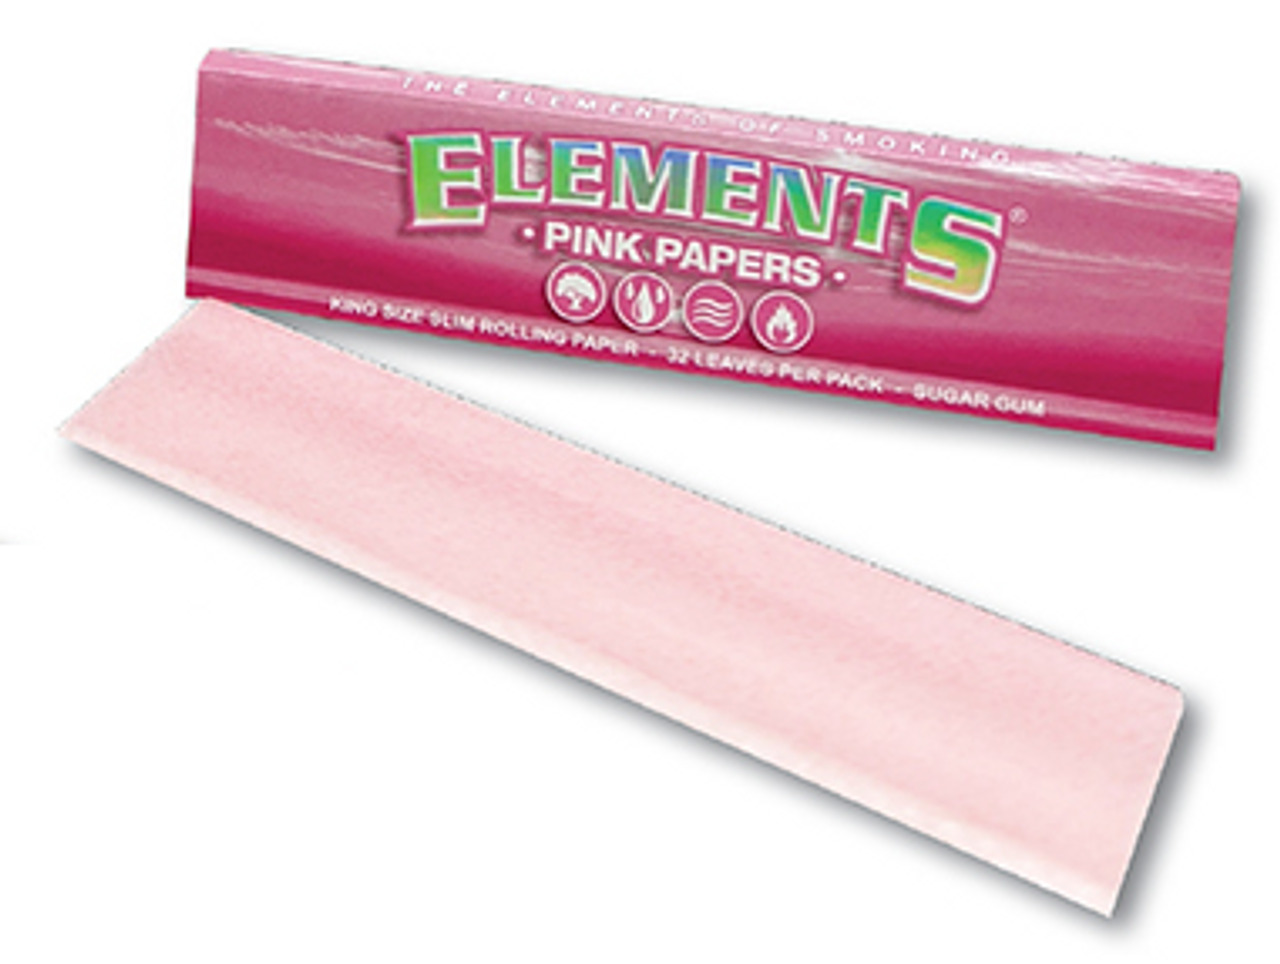 Elements PINK  King Size Rolling Papers Ultra Thin Slim Discounts FREE USA SHPD